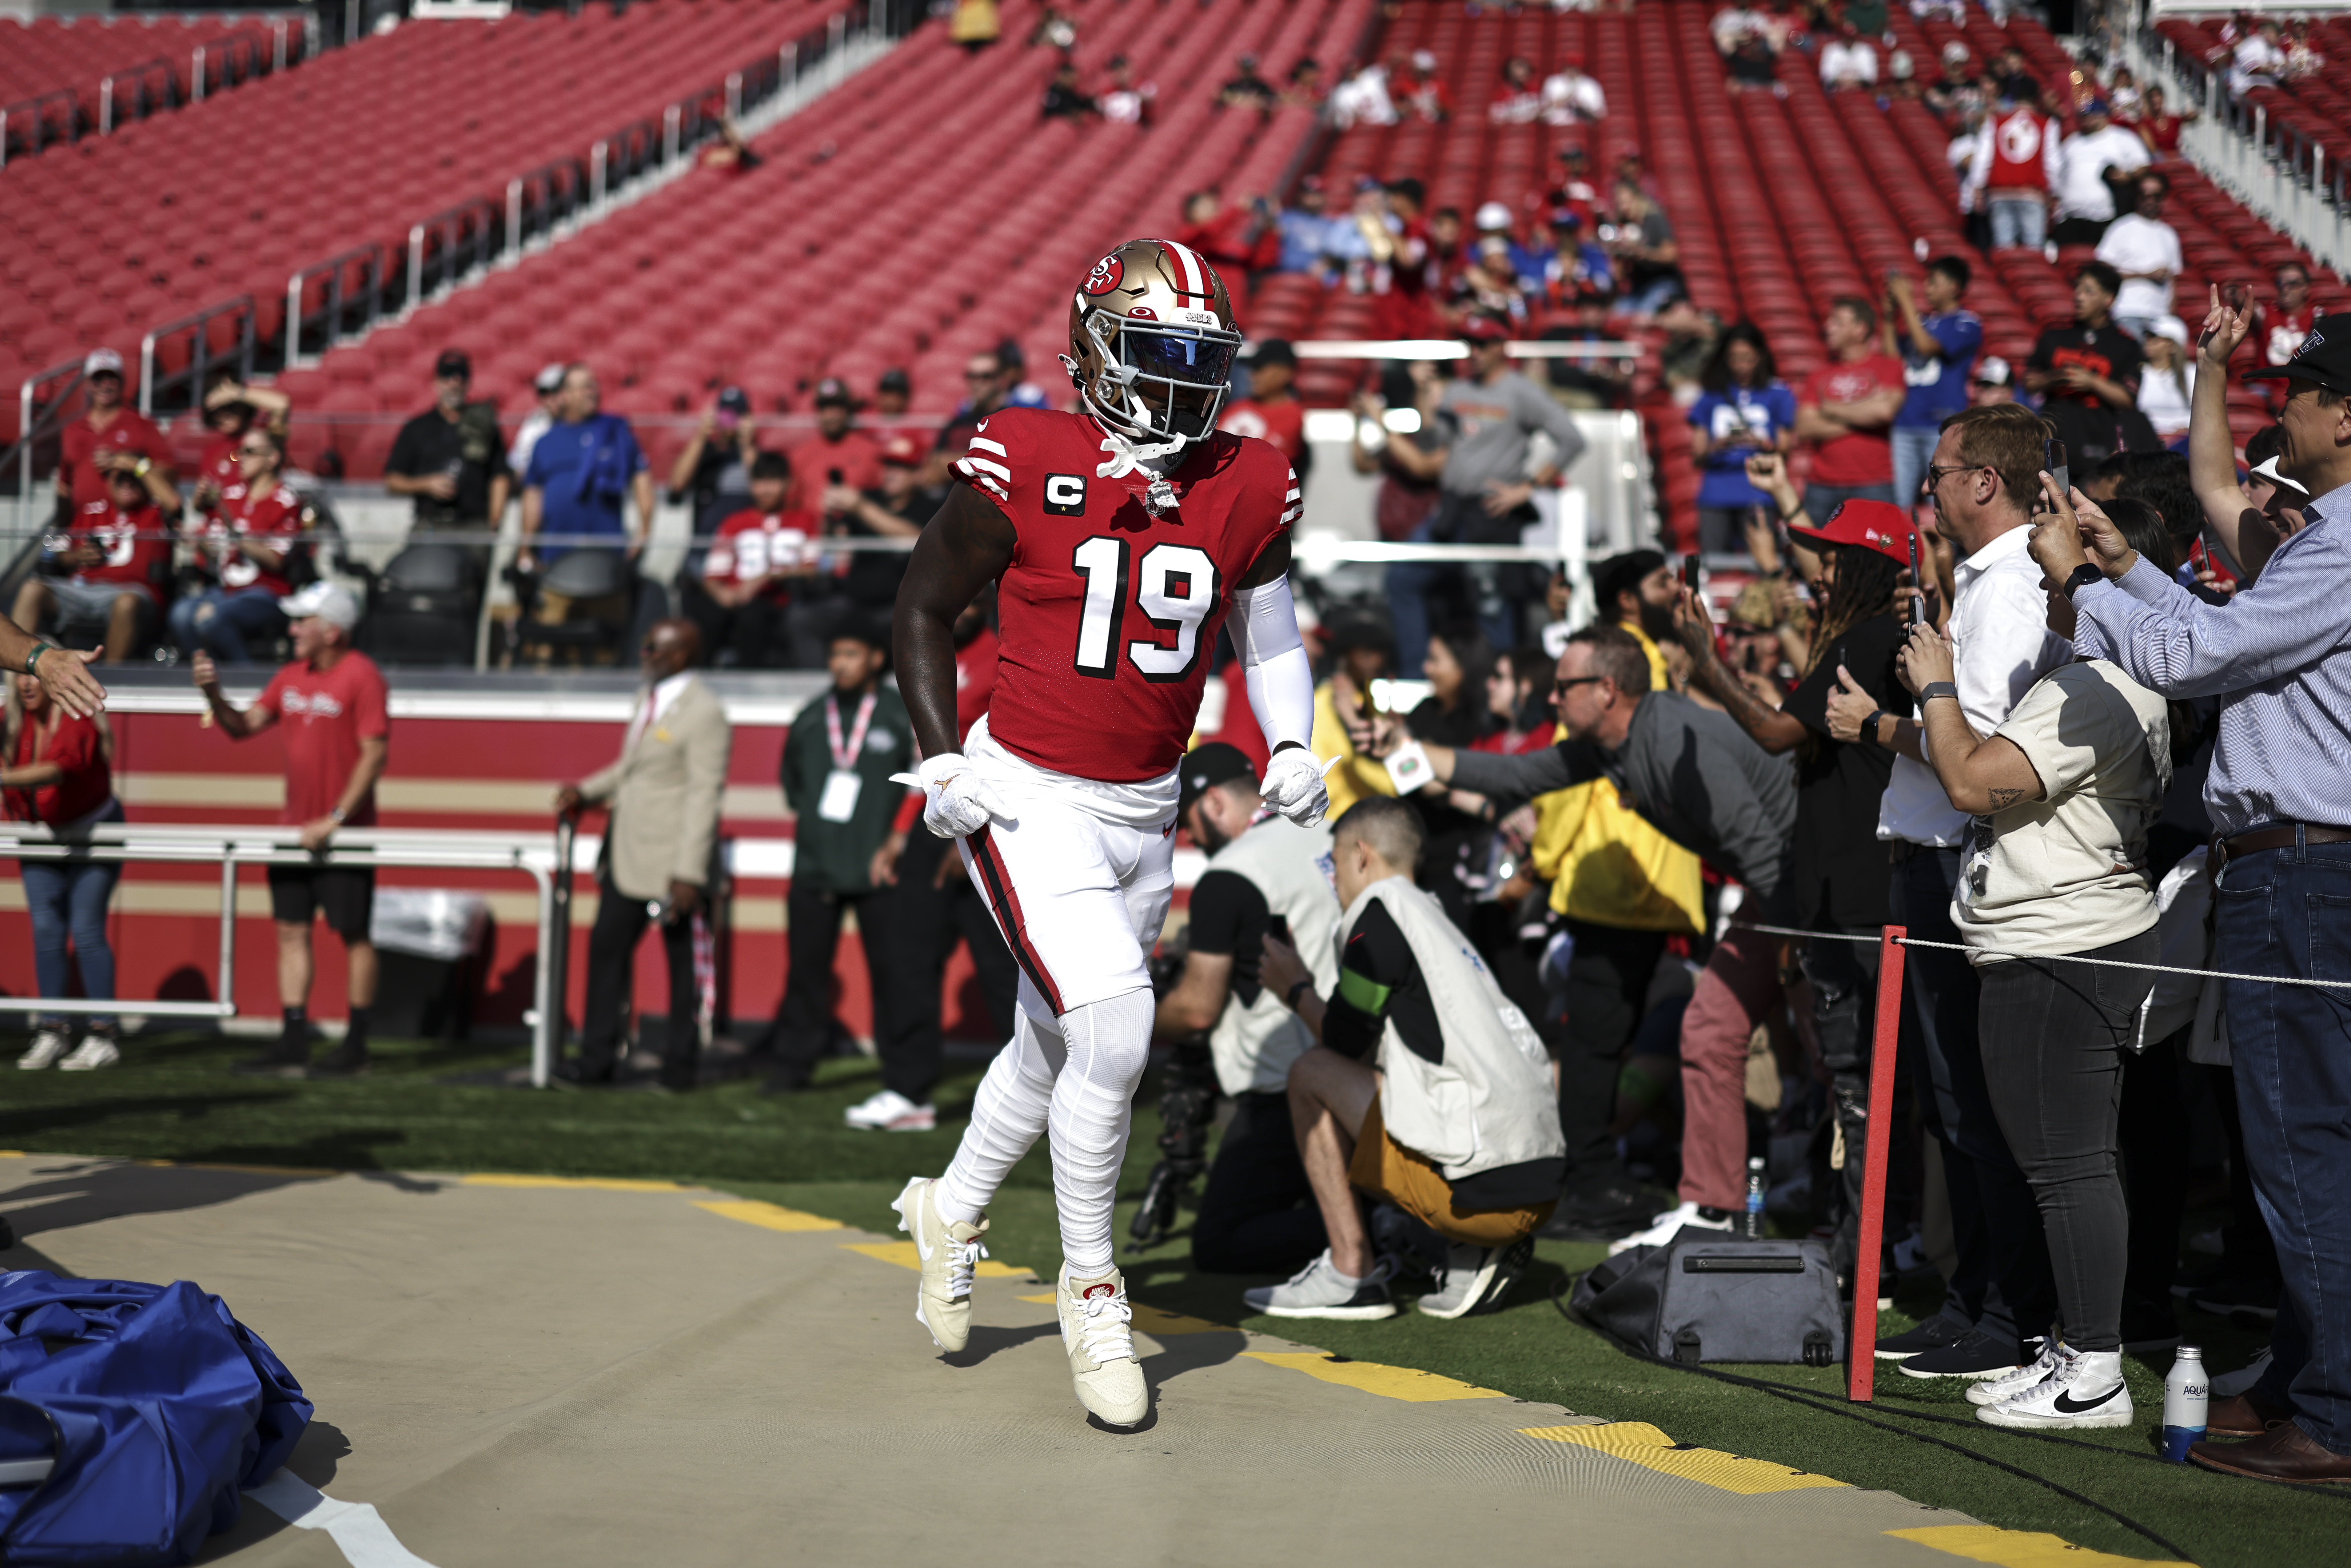 Deebo Samuel #19 of the San Francisco 49ers runs as he takes the field prior to an NFL football game between the San Francisco 49ers and the New York Giants at Levi’s Stadium on September 21, 2023 in Santa Clara, California.